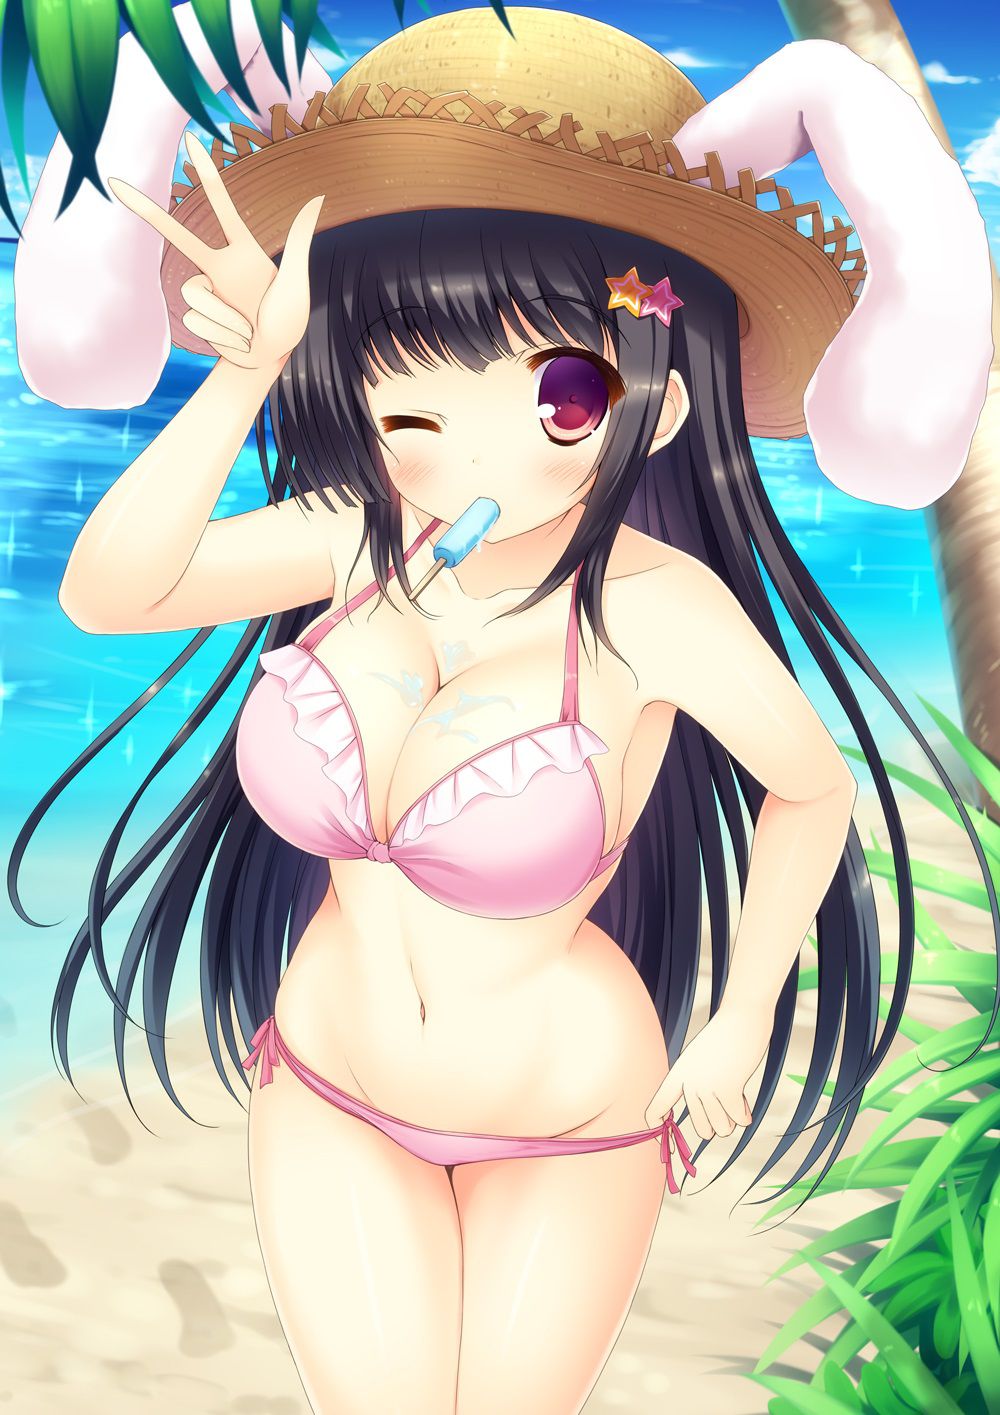 I'm wearing a straw hat 2-d girl image should (32 photos) 21